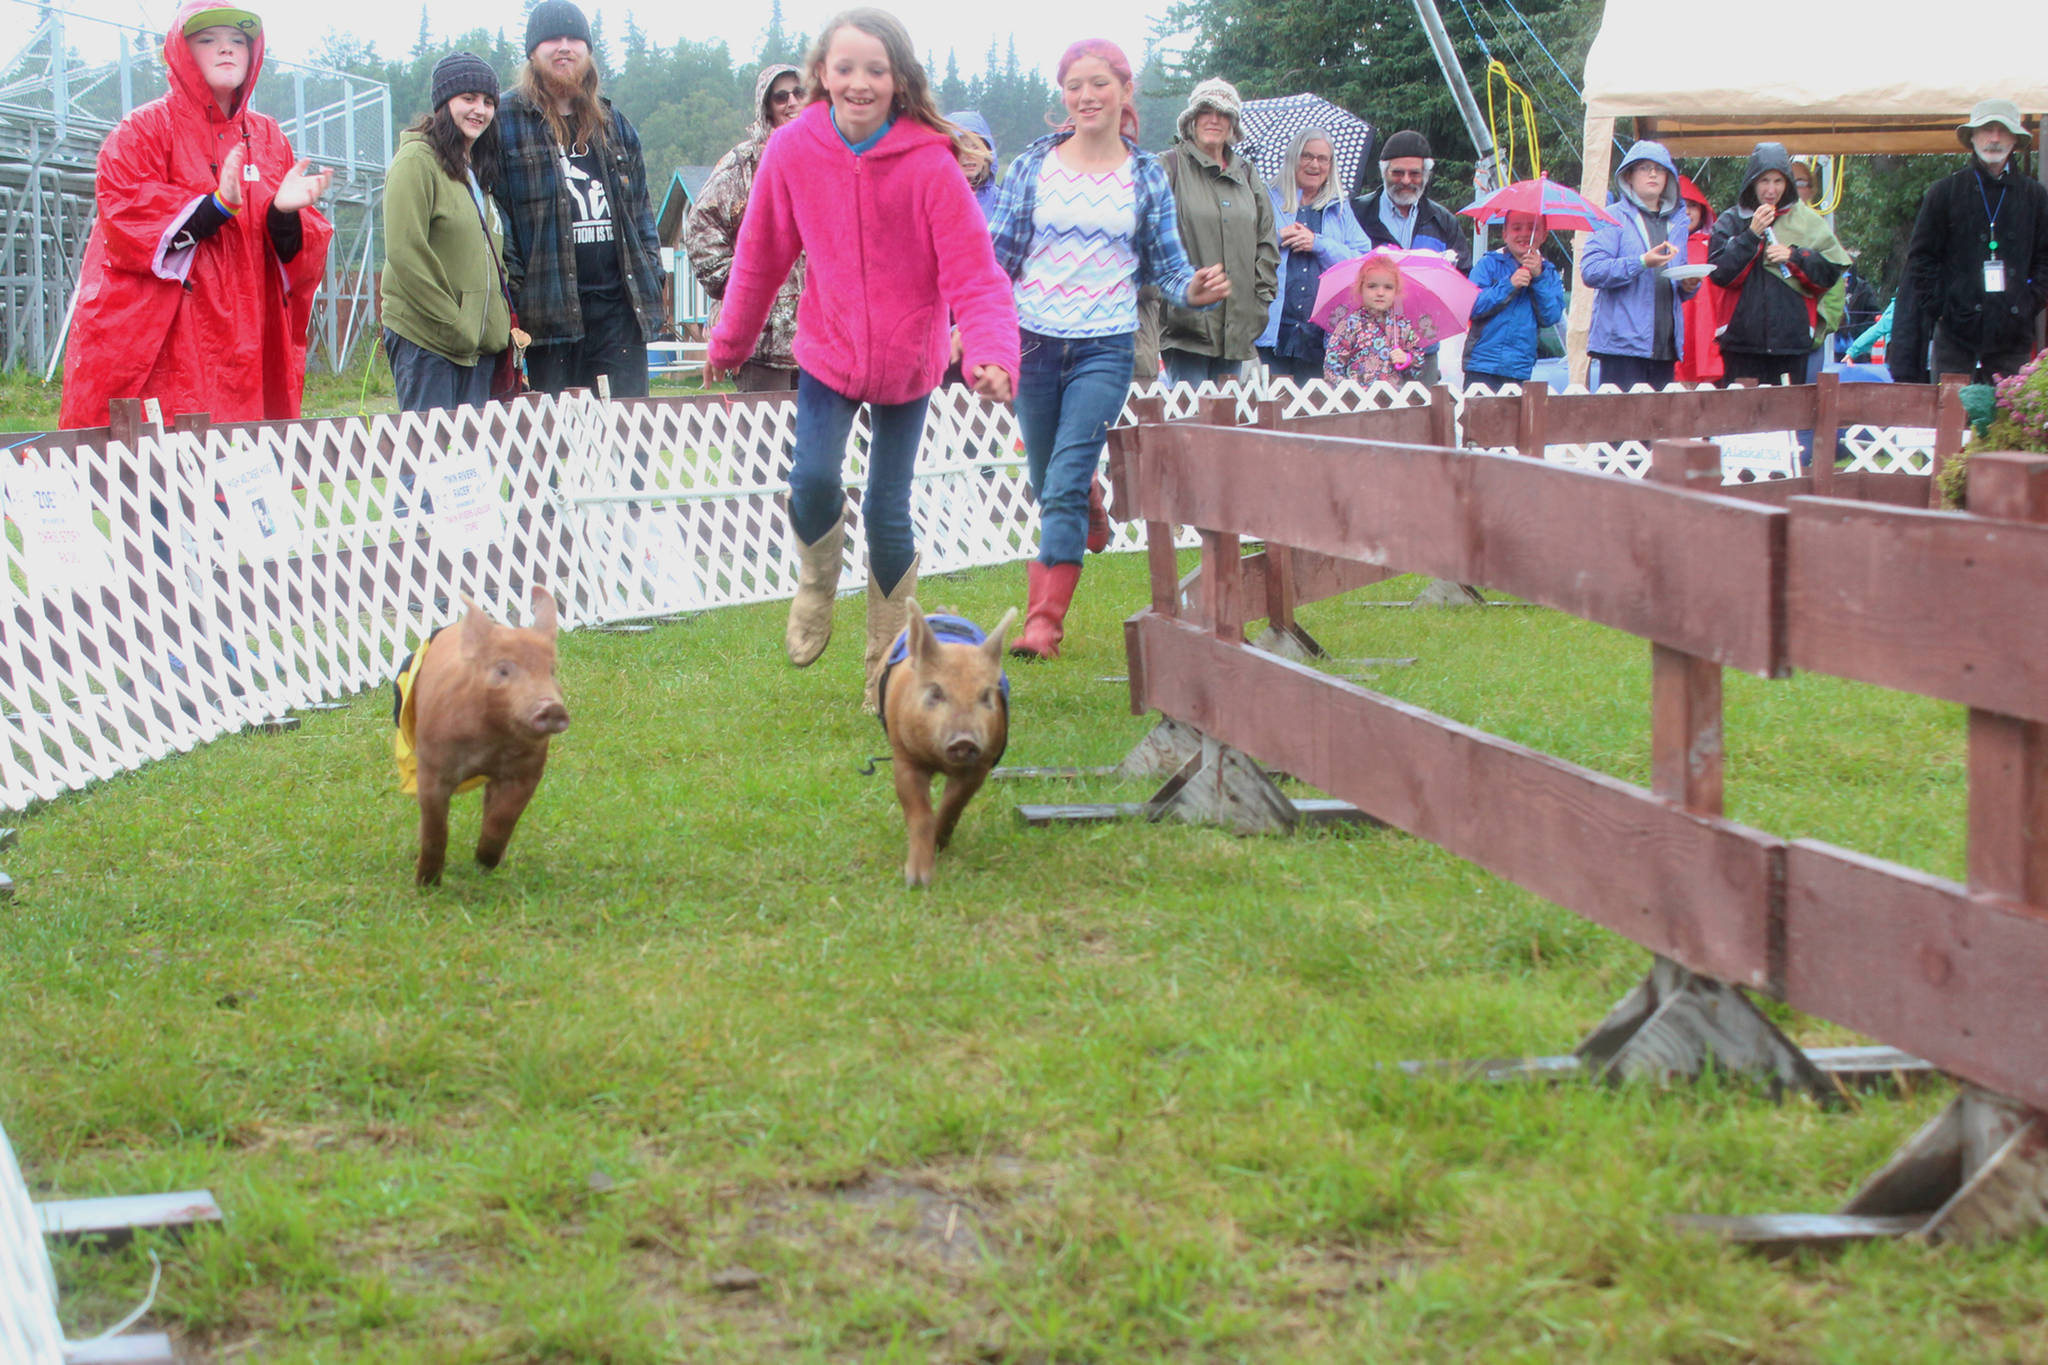 Pigs, sword swallowers and magic, oh my: it’s fair time